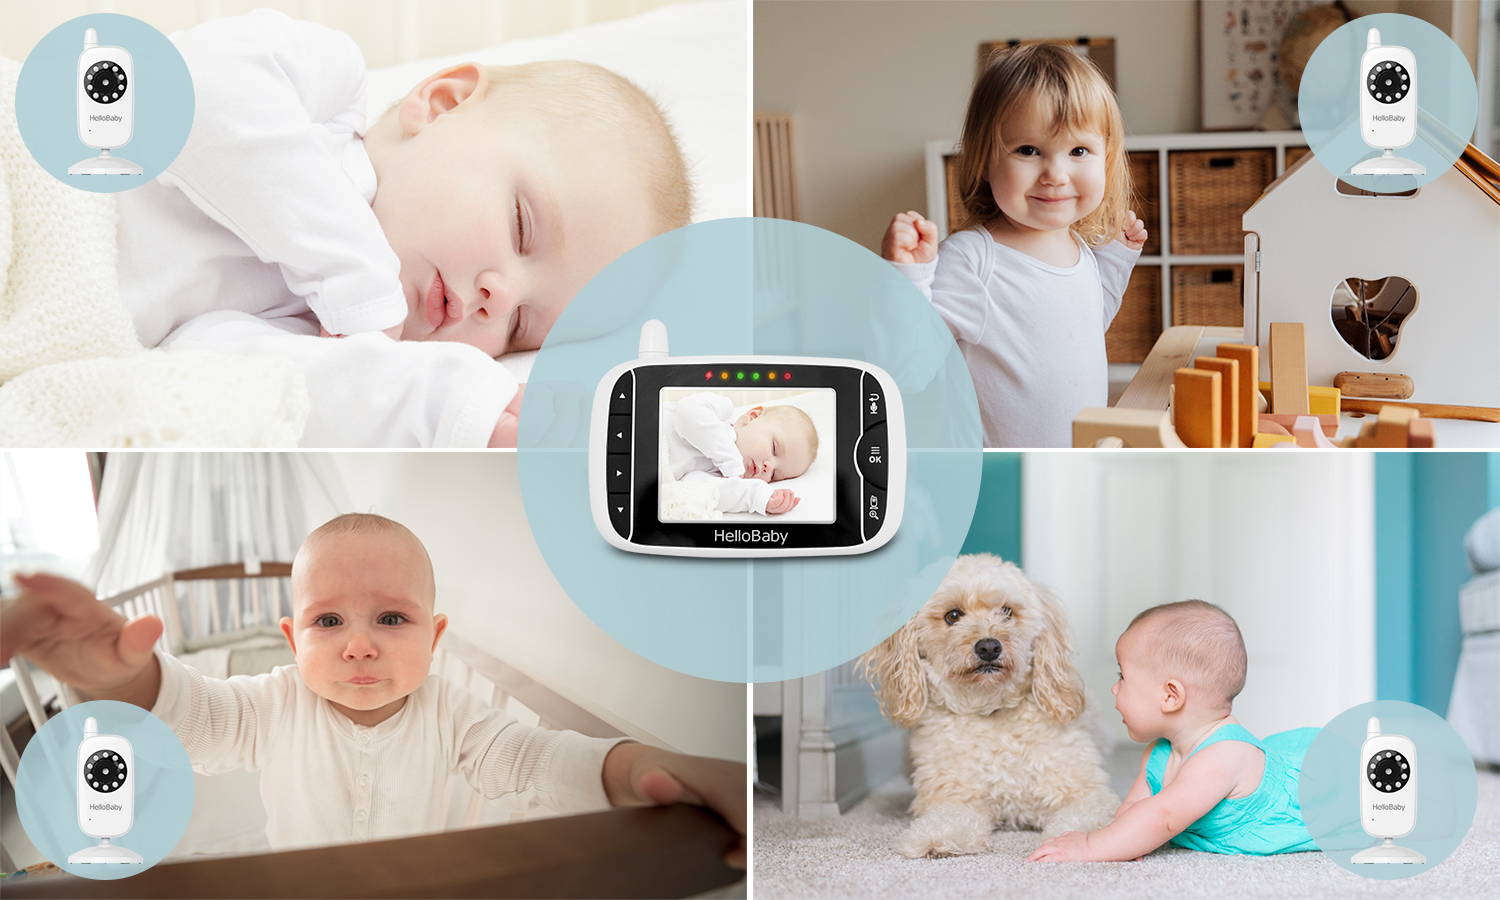  HelloBaby Smart HB30 Monitor, No WiFi, No Apps, Up to